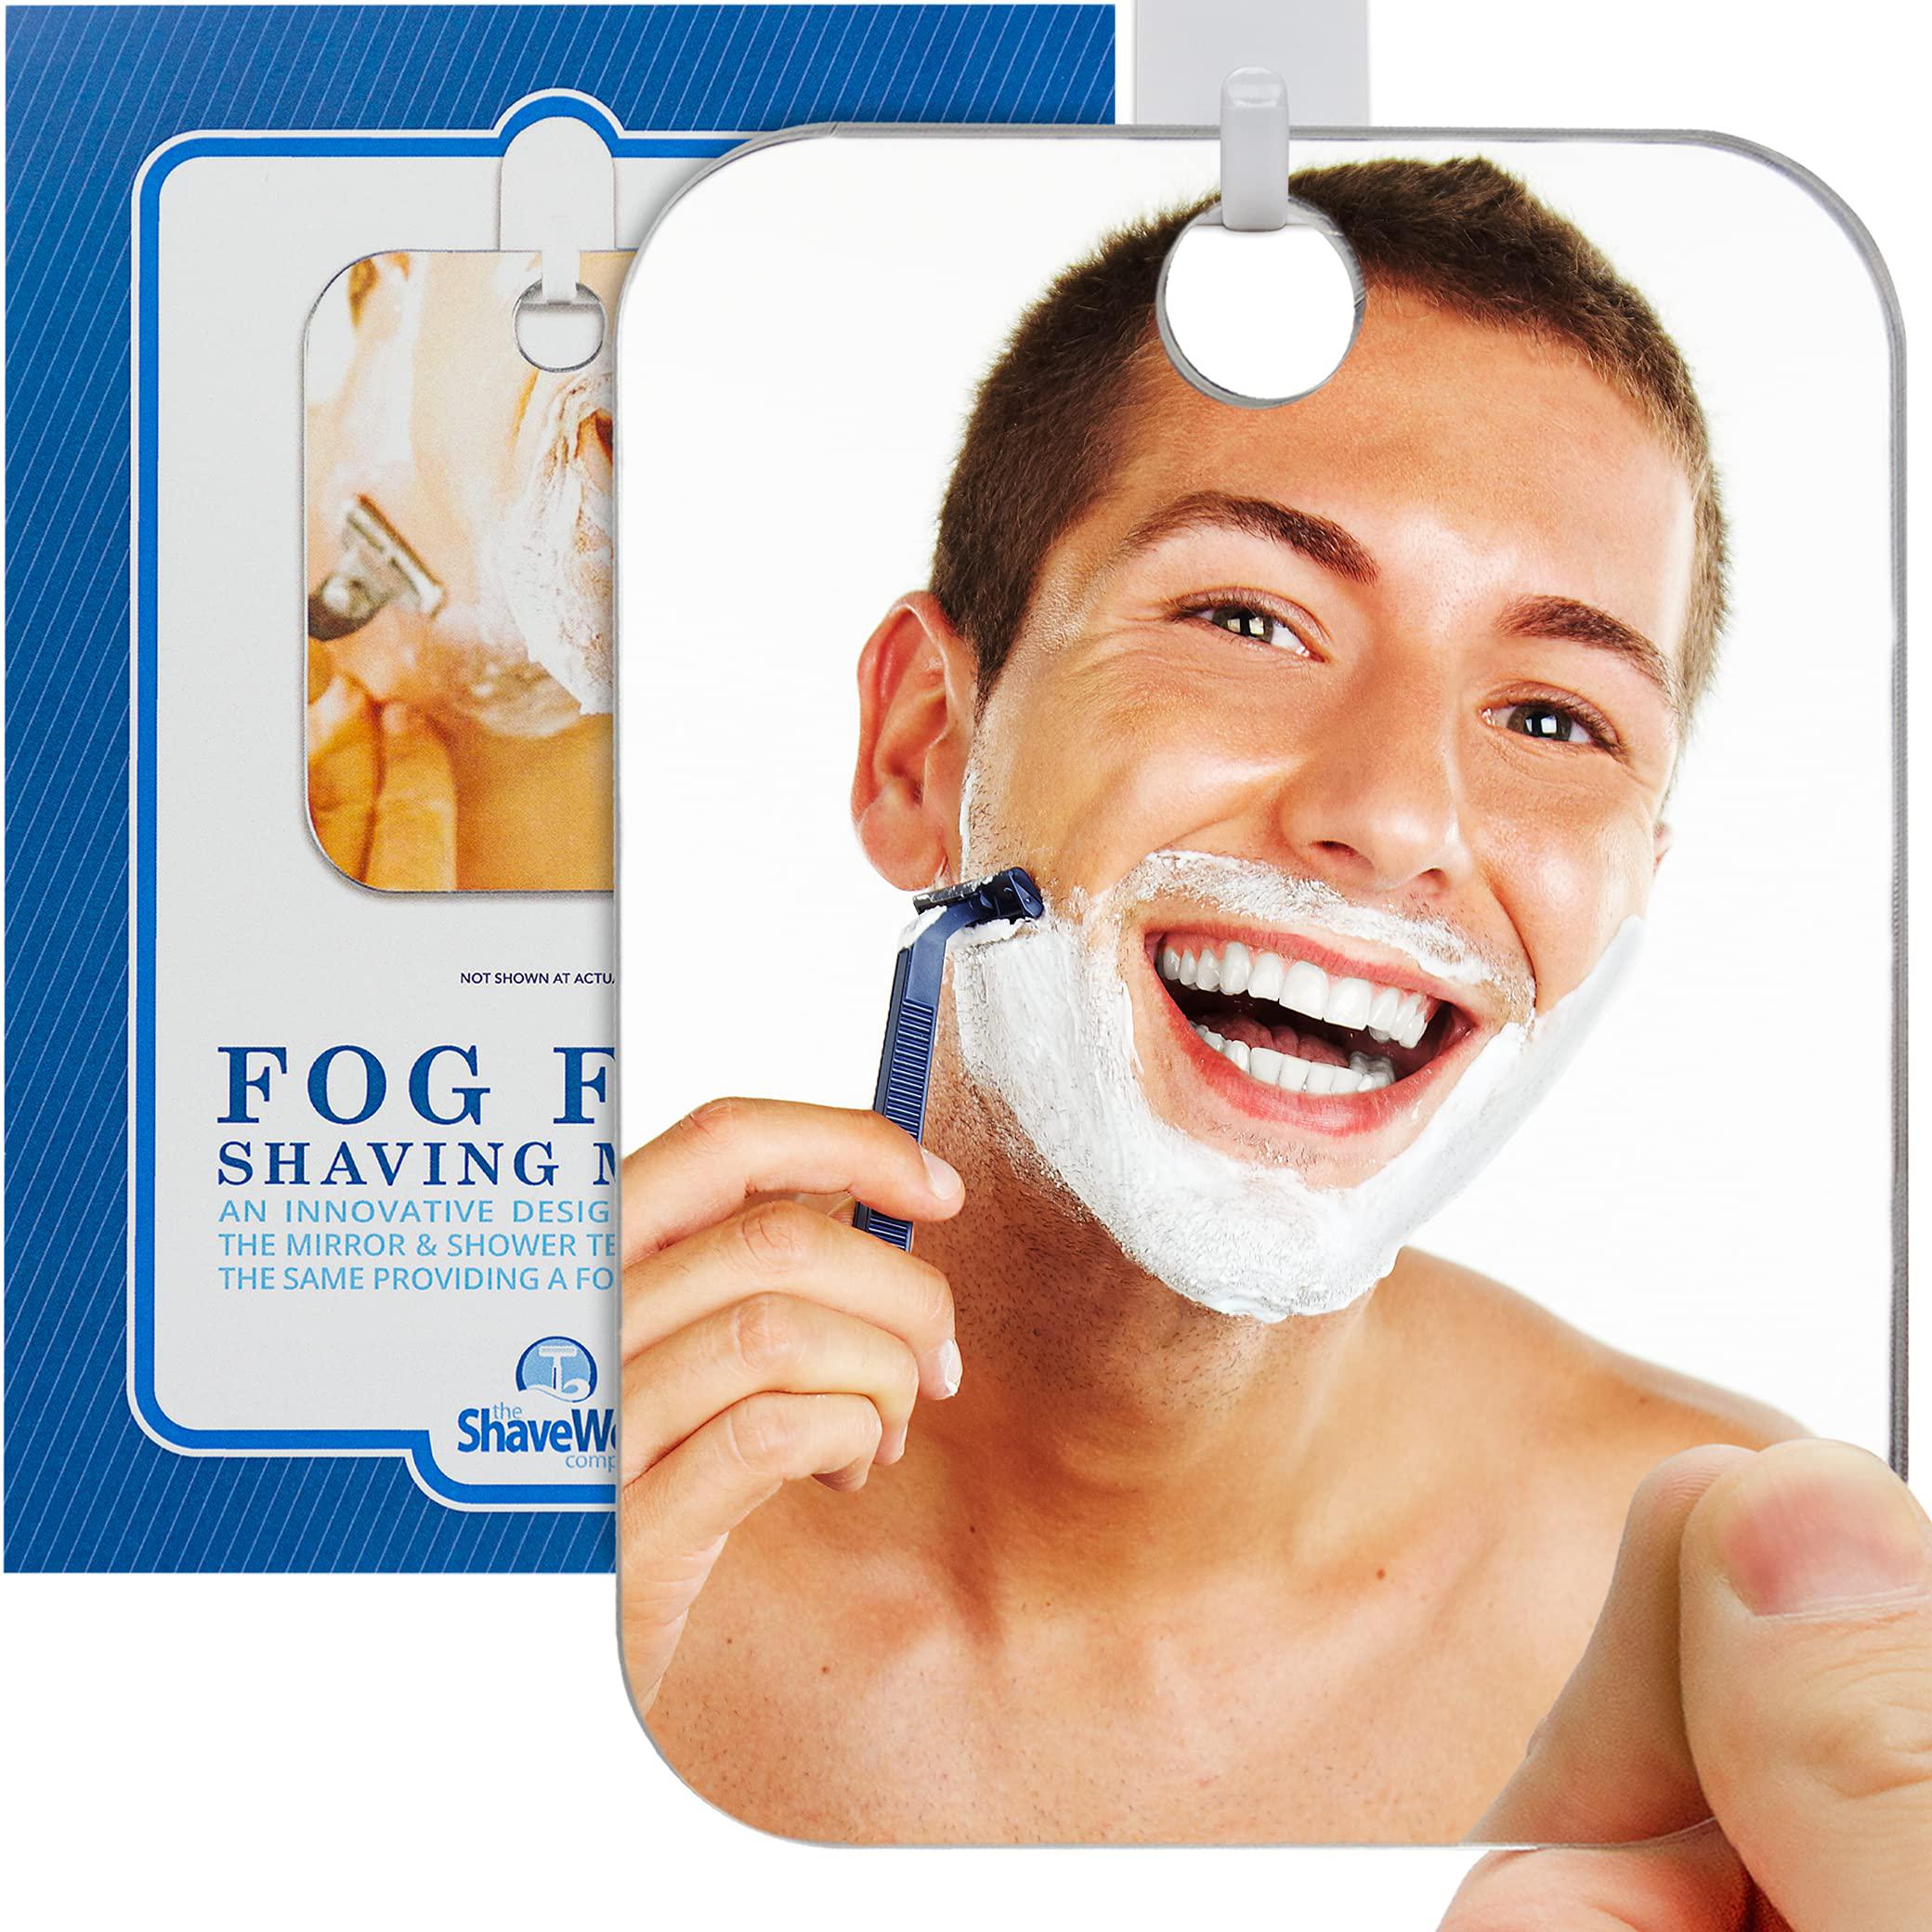 the shave well company original anti-fog shaving mirror | fogless bathroom shower mirror with handheld option for men and wom